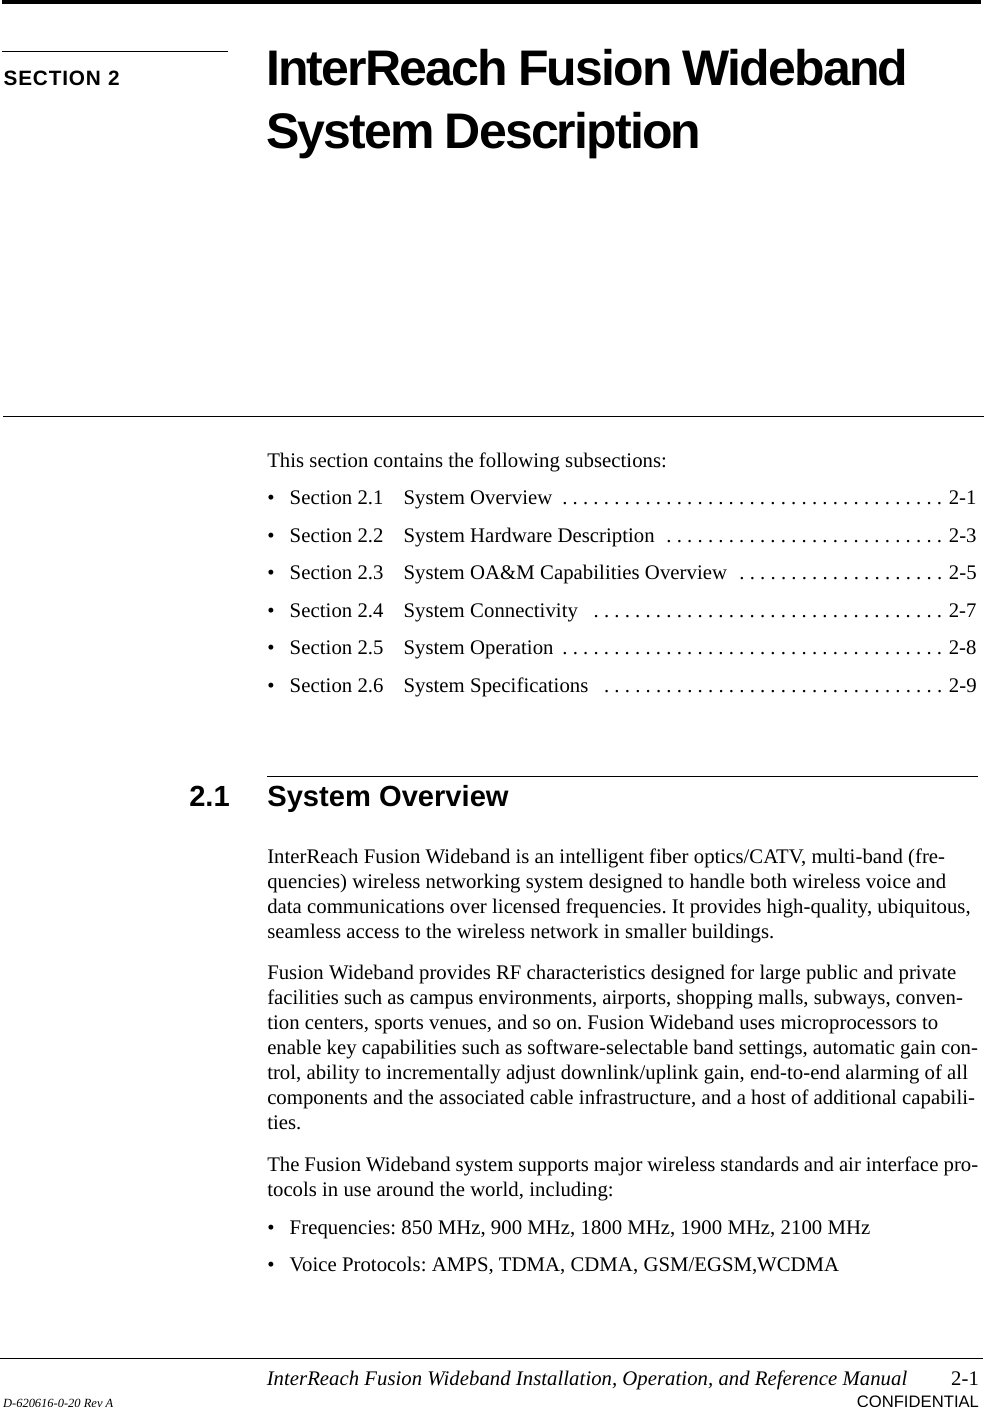 InterReach Fusion Wideband Installation, Operation, and Reference Manual 2-1D-620616-0-20 Rev A CONFIDENTIALSECTION 2 InterReach Fusion Wideband System DescriptionThis section contains the following subsections:• Section 2.1   System Overview  . . . . . . . . . . . . . . . . . . . . . . . . . . . . . . . . . . . . . 2-1• Section 2.2   System Hardware Description  . . . . . . . . . . . . . . . . . . . . . . . . . . . 2-3• Section 2.3   System OA&amp;M Capabilities Overview  . . . . . . . . . . . . . . . . . . . . 2-5• Section 2.4   System Connectivity   . . . . . . . . . . . . . . . . . . . . . . . . . . . . . . . . . . 2-7• Section 2.5   System Operation  . . . . . . . . . . . . . . . . . . . . . . . . . . . . . . . . . . . . . 2-8• Section 2.6   System Specifications   . . . . . . . . . . . . . . . . . . . . . . . . . . . . . . . . . 2-92.1 System OverviewInterReach Fusion Wideband is an intelligent fiber optics/CATV, multi-band (fre-quencies) wireless networking system designed to handle both wireless voice and data communications over licensed frequencies. It provides high-quality, ubiquitous, seamless access to the wireless network in smaller buildings.Fusion Wideband provides RF characteristics designed for large public and private facilities such as campus environments, airports, shopping malls, subways, conven-tion centers, sports venues, and so on. Fusion Wideband uses microprocessors to enable key capabilities such as software-selectable band settings, automatic gain con-trol, ability to incrementally adjust downlink/uplink gain, end-to-end alarming of all components and the associated cable infrastructure, and a host of additional capabili-ties.The Fusion Wideband system supports major wireless standards and air interface pro-tocols in use around the world, including:• Frequencies: 850 MHz, 900 MHz, 1800 MHz, 1900 MHz, 2100 MHz• Voice Protocols: AMPS, TDMA, CDMA, GSM/EGSM,WCDMA